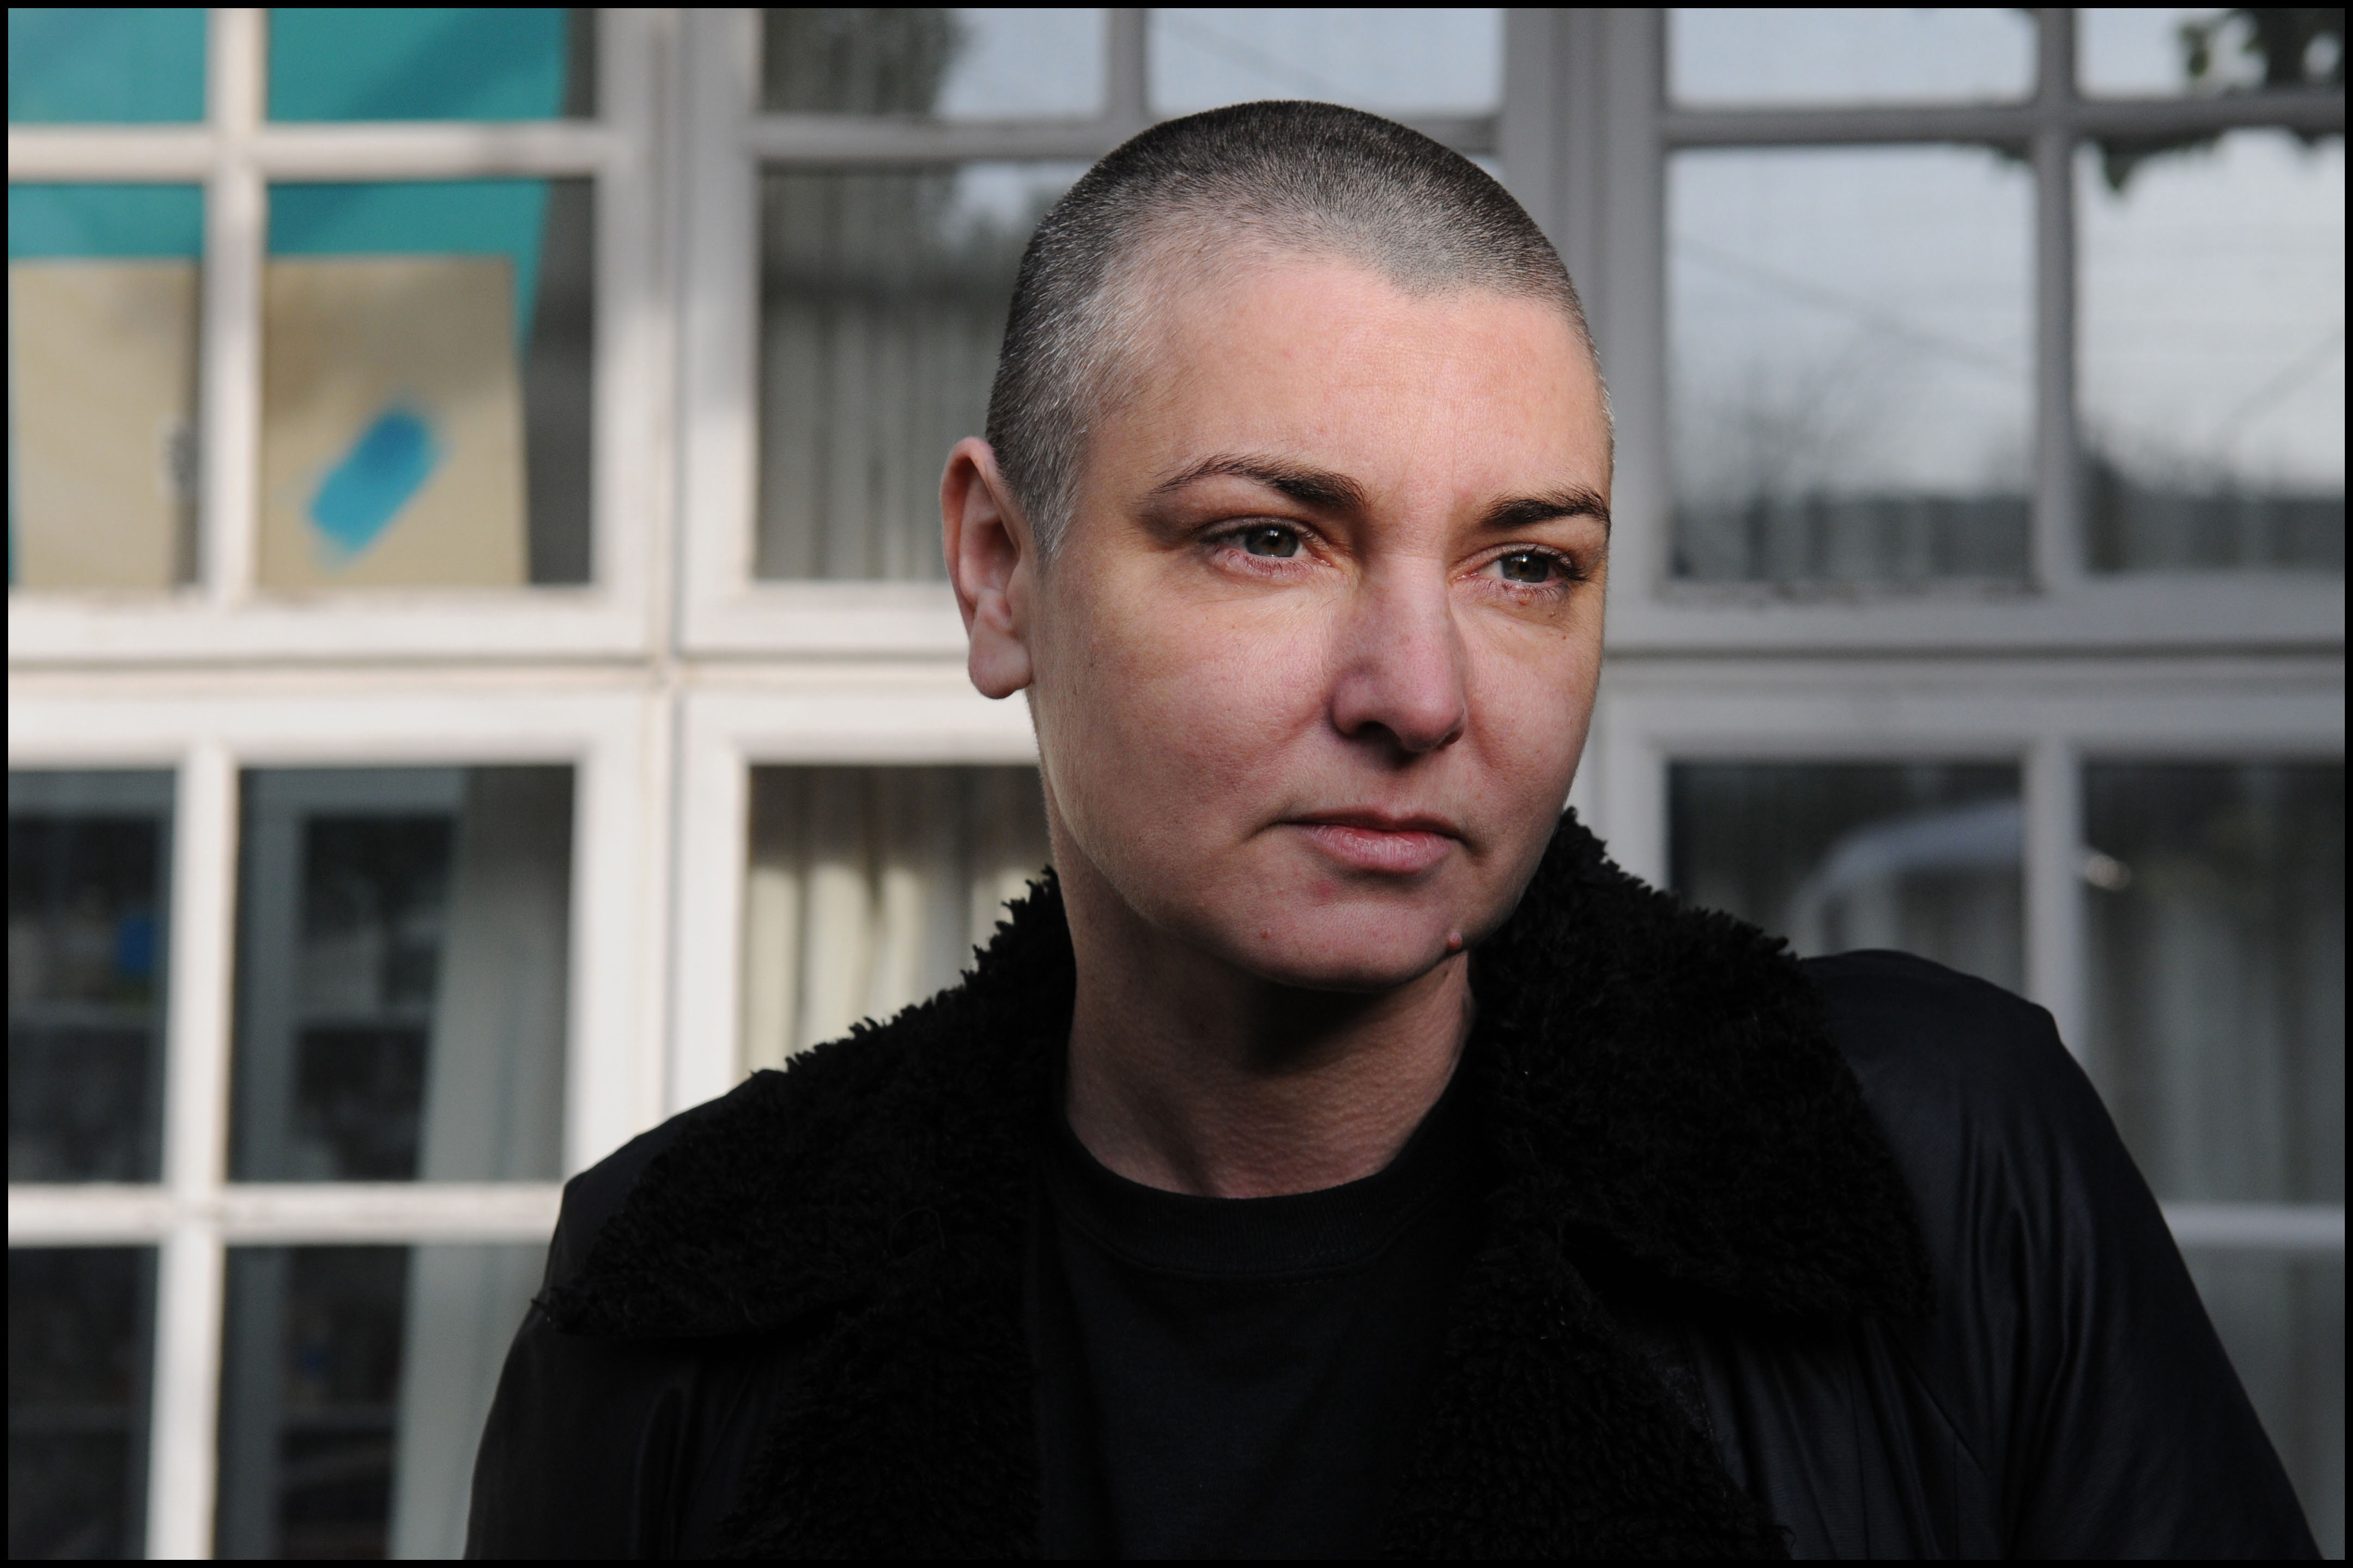 Sinéad O'Connor posing for a photo at her home in County Wicklow, Ireland on February 3, 2012 | Source: Getty Images